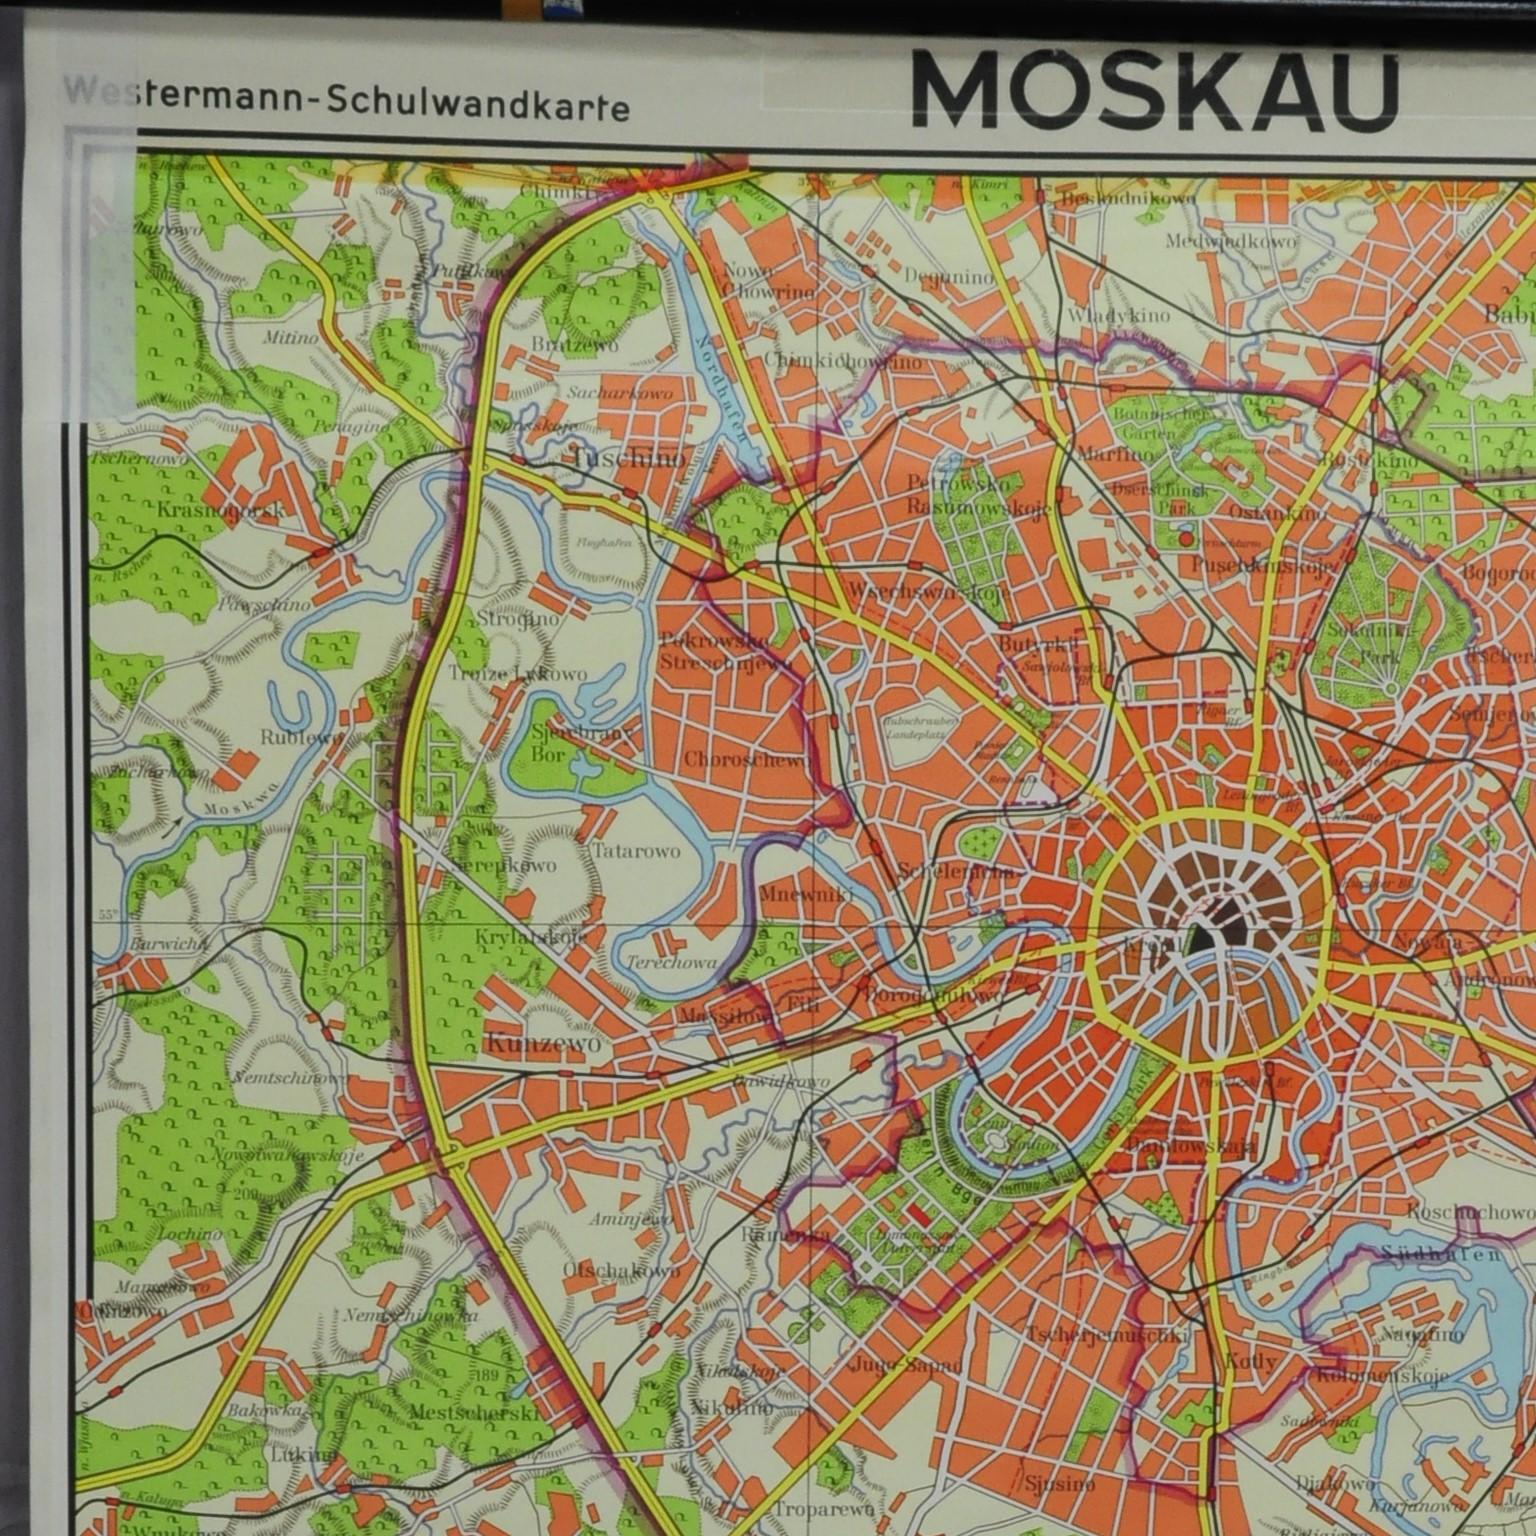 A classical rollabe vintage wall chart showing an aerial view of the city of Moscow, Russia. It was published by Westermann. Used as teaching material in German schools. Colorful print on paper reinforced with canvas.
Measurements:
Width 109 cm